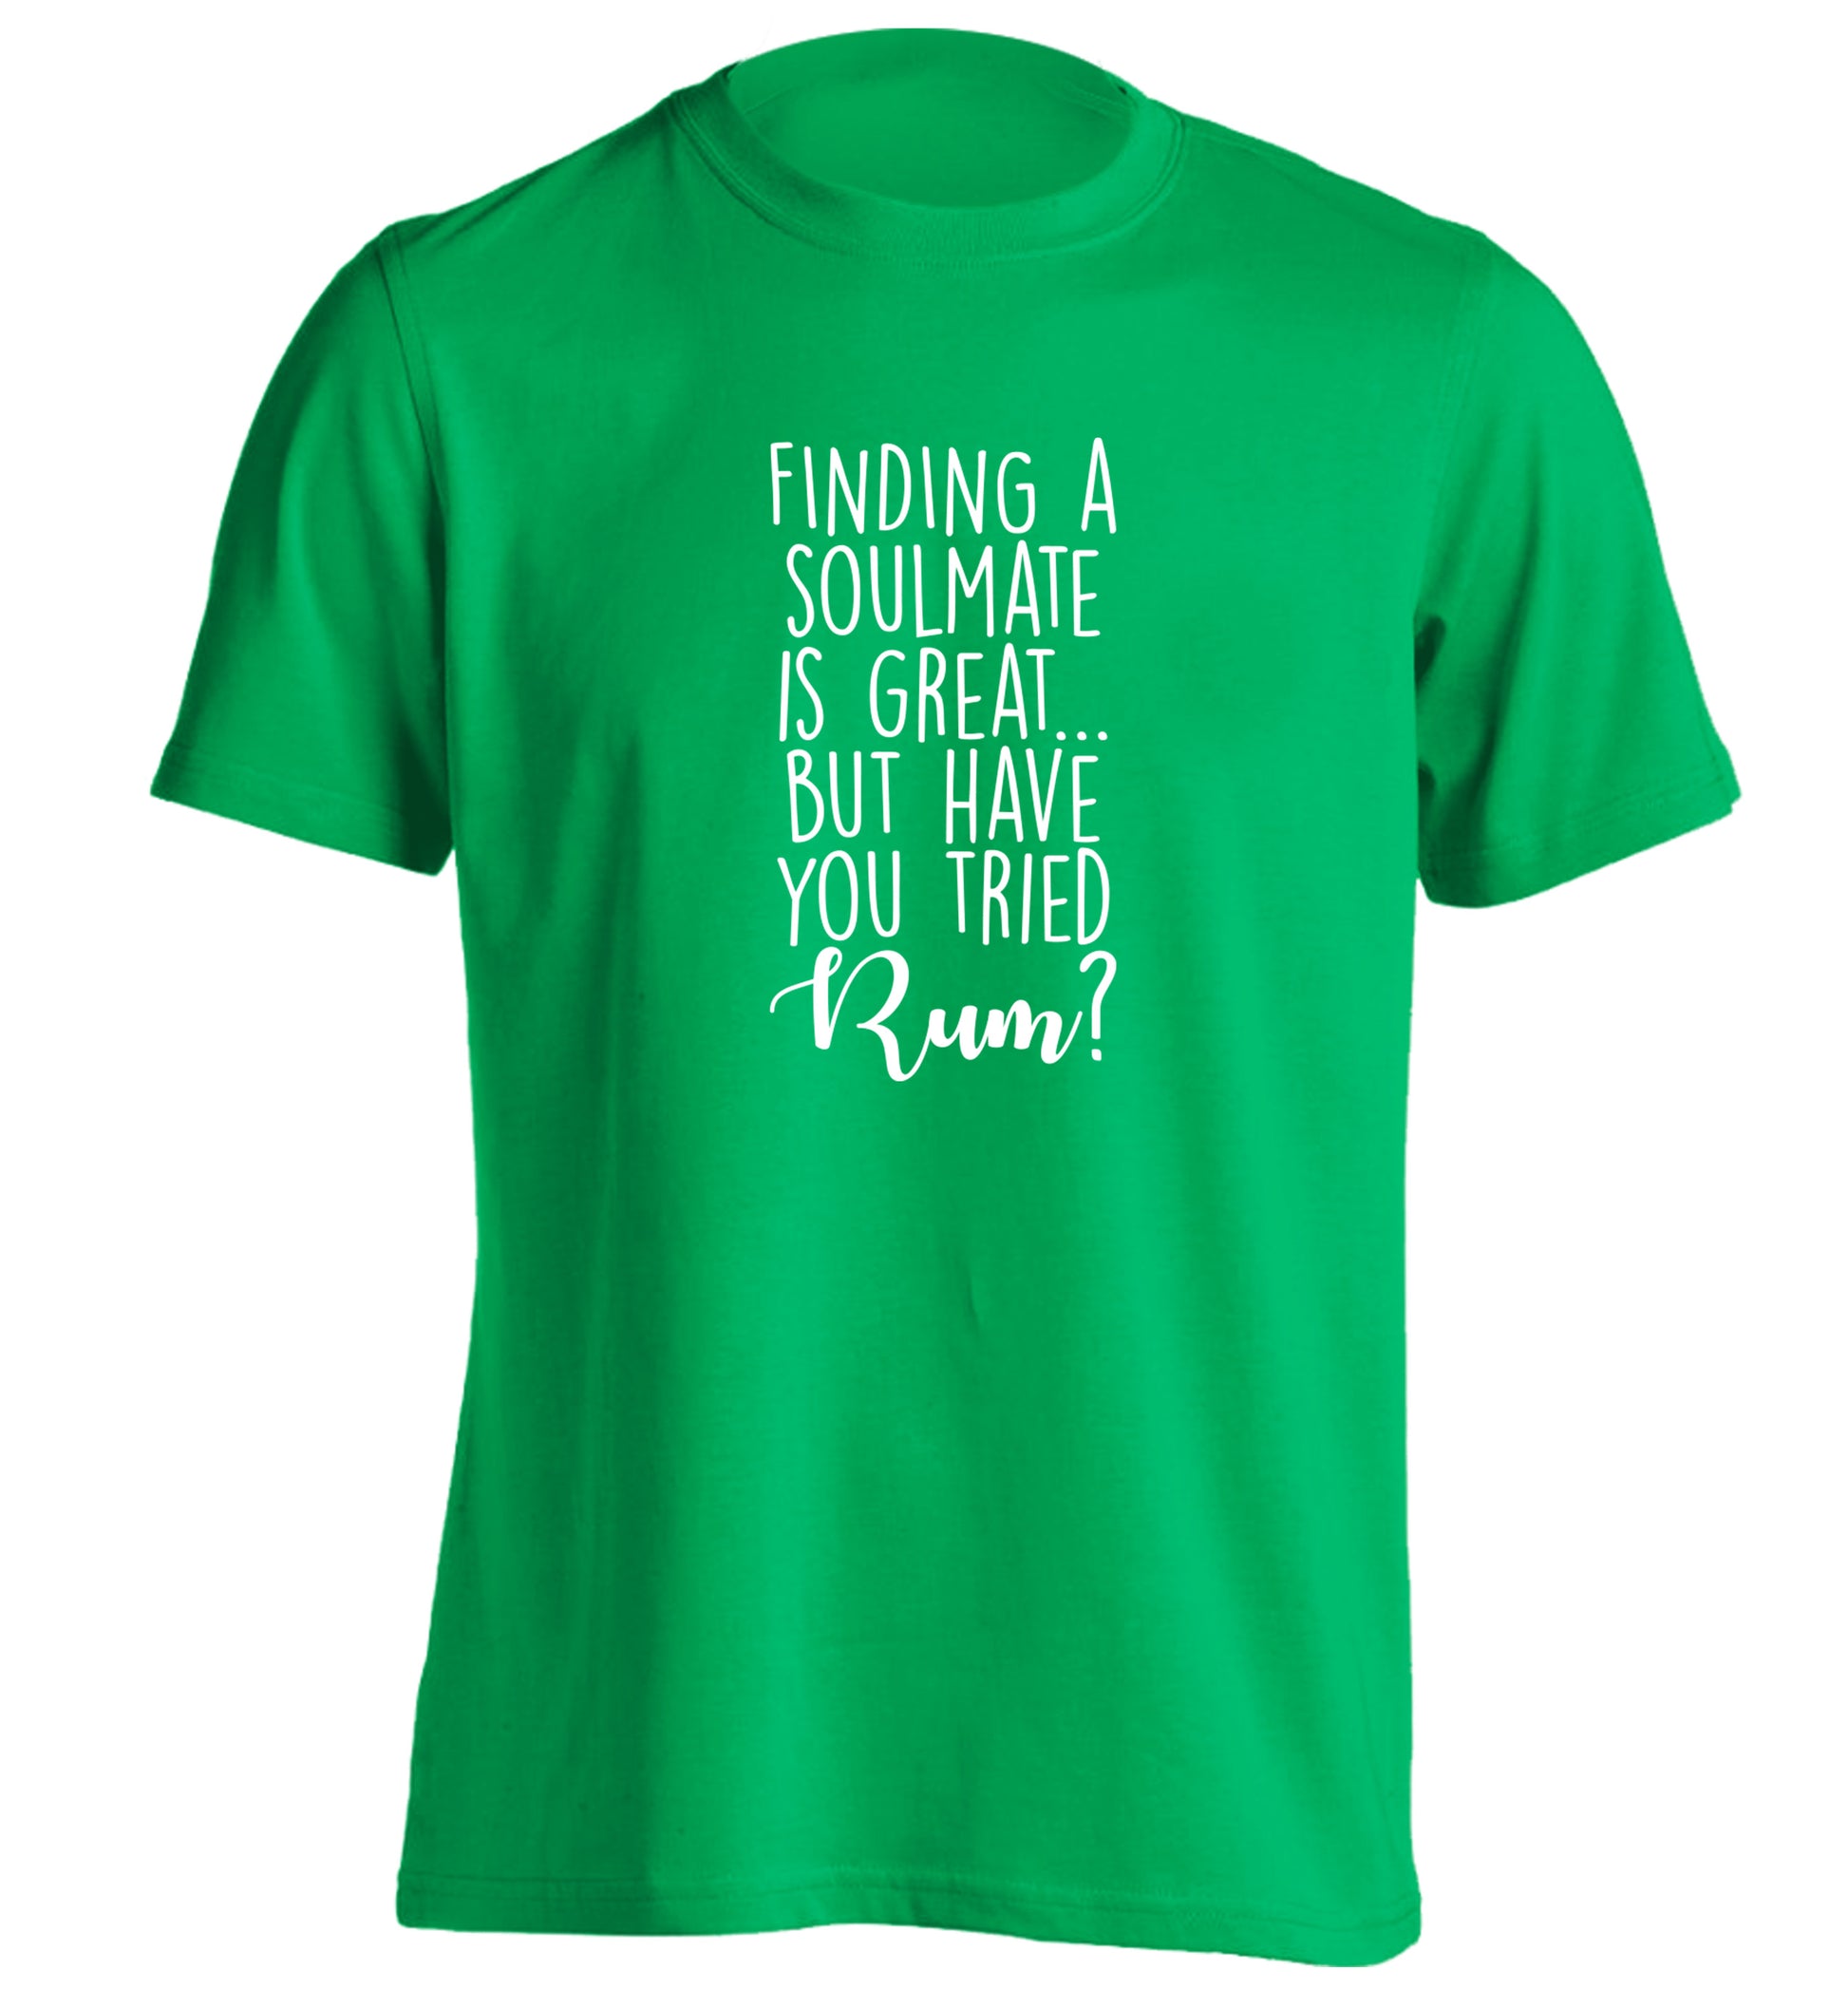 Finding a soulmate is great but have you tried rum? adults unisex green Tshirt 2XL